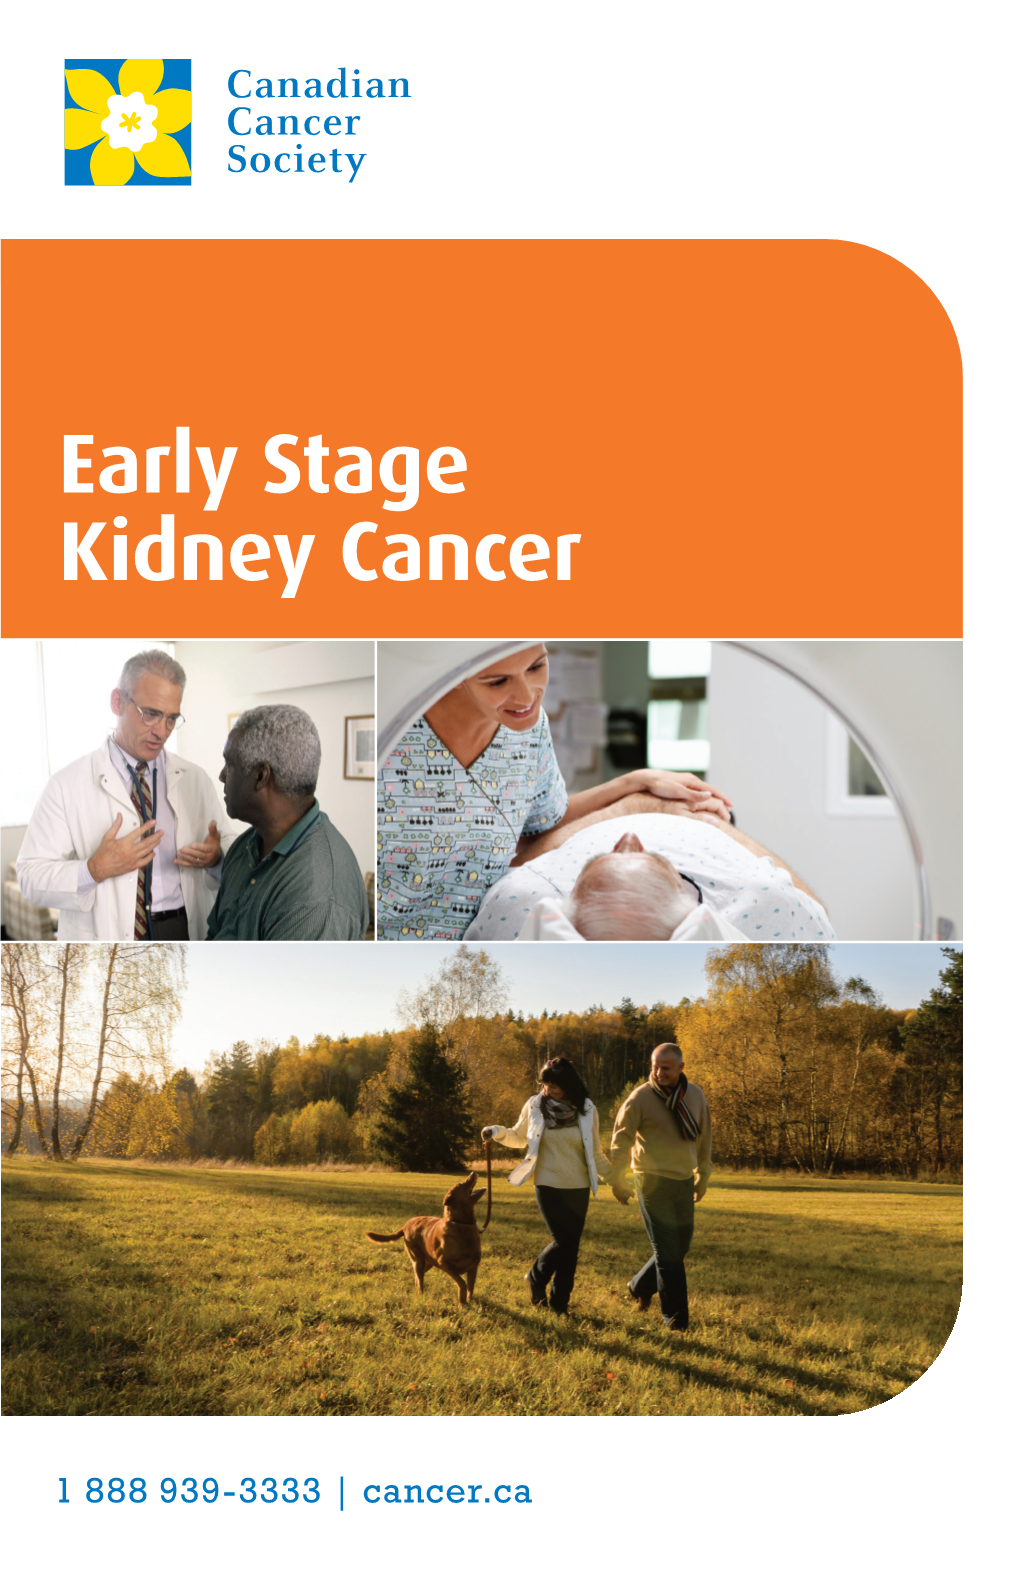 Early Stage Kidney Cancer We Would Like to Thank the People Who Shared Their Personal Experiences with Us